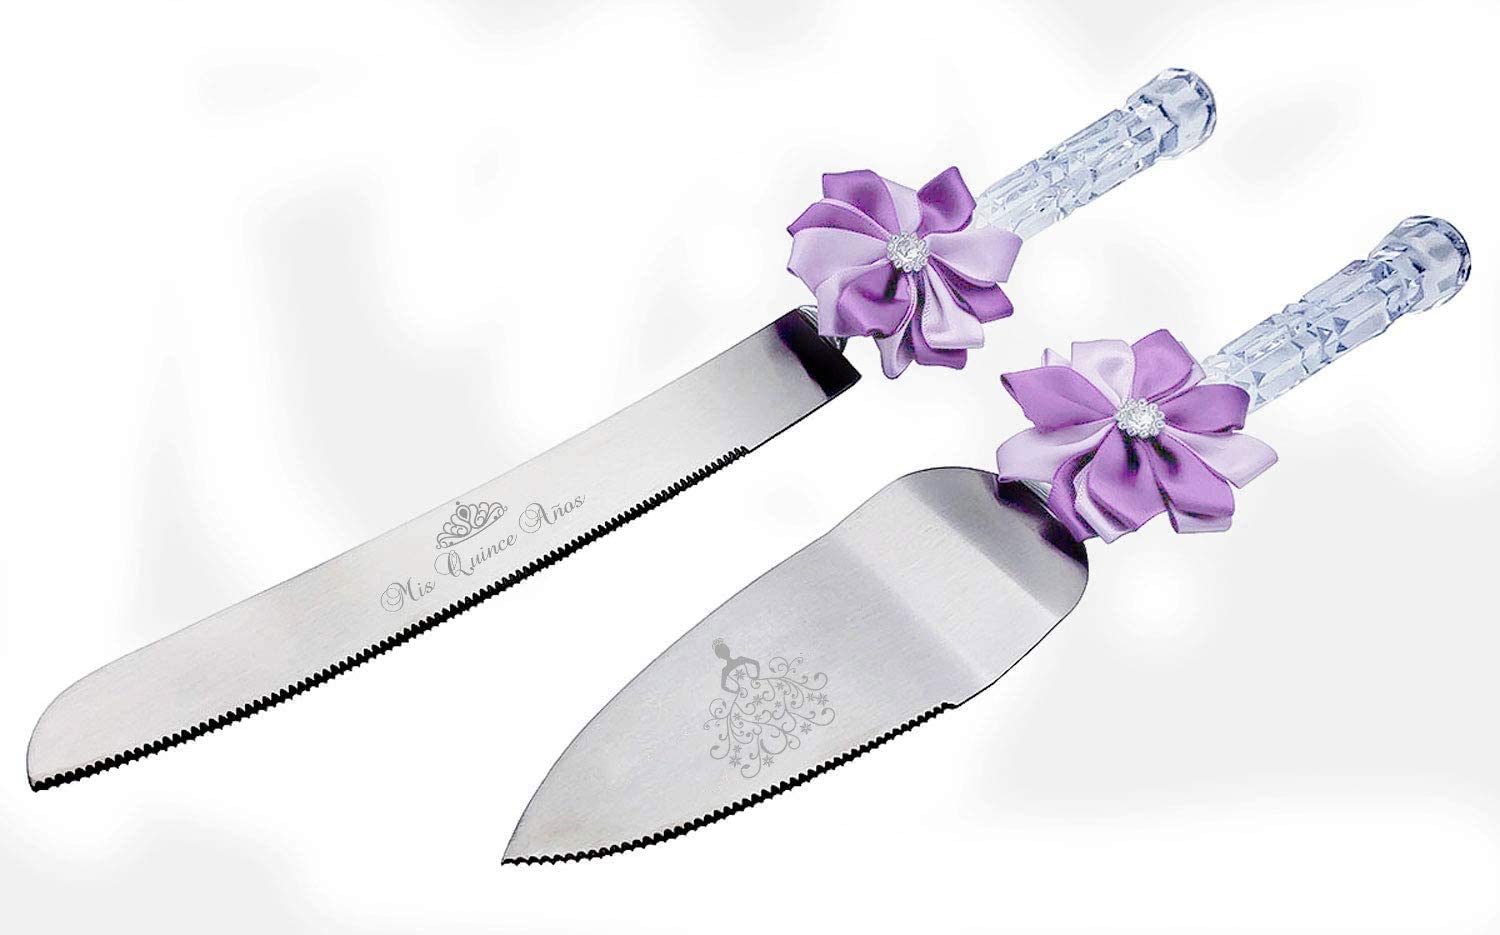 GIFTS INFINITY - Mis Quince Anos Cake Cutter Knife Server Set with Craft Purple color